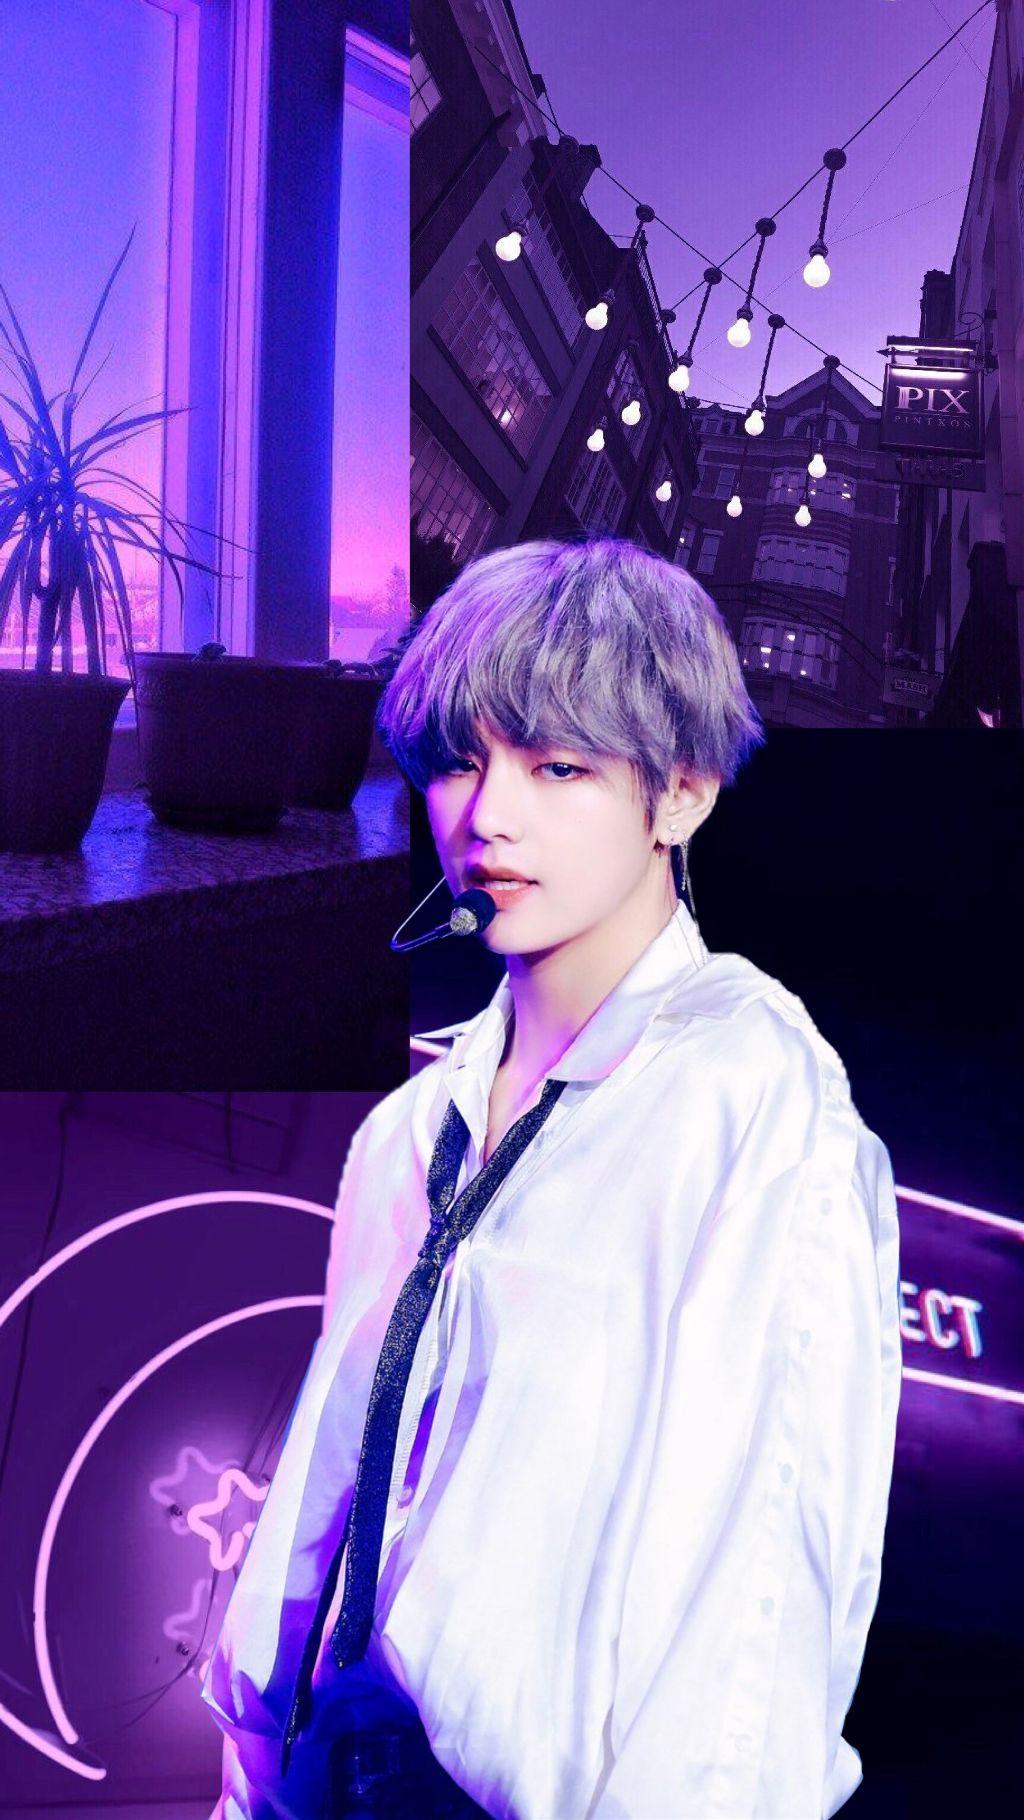 Image result for i purple you kim taehuyng wallpaper in 2019